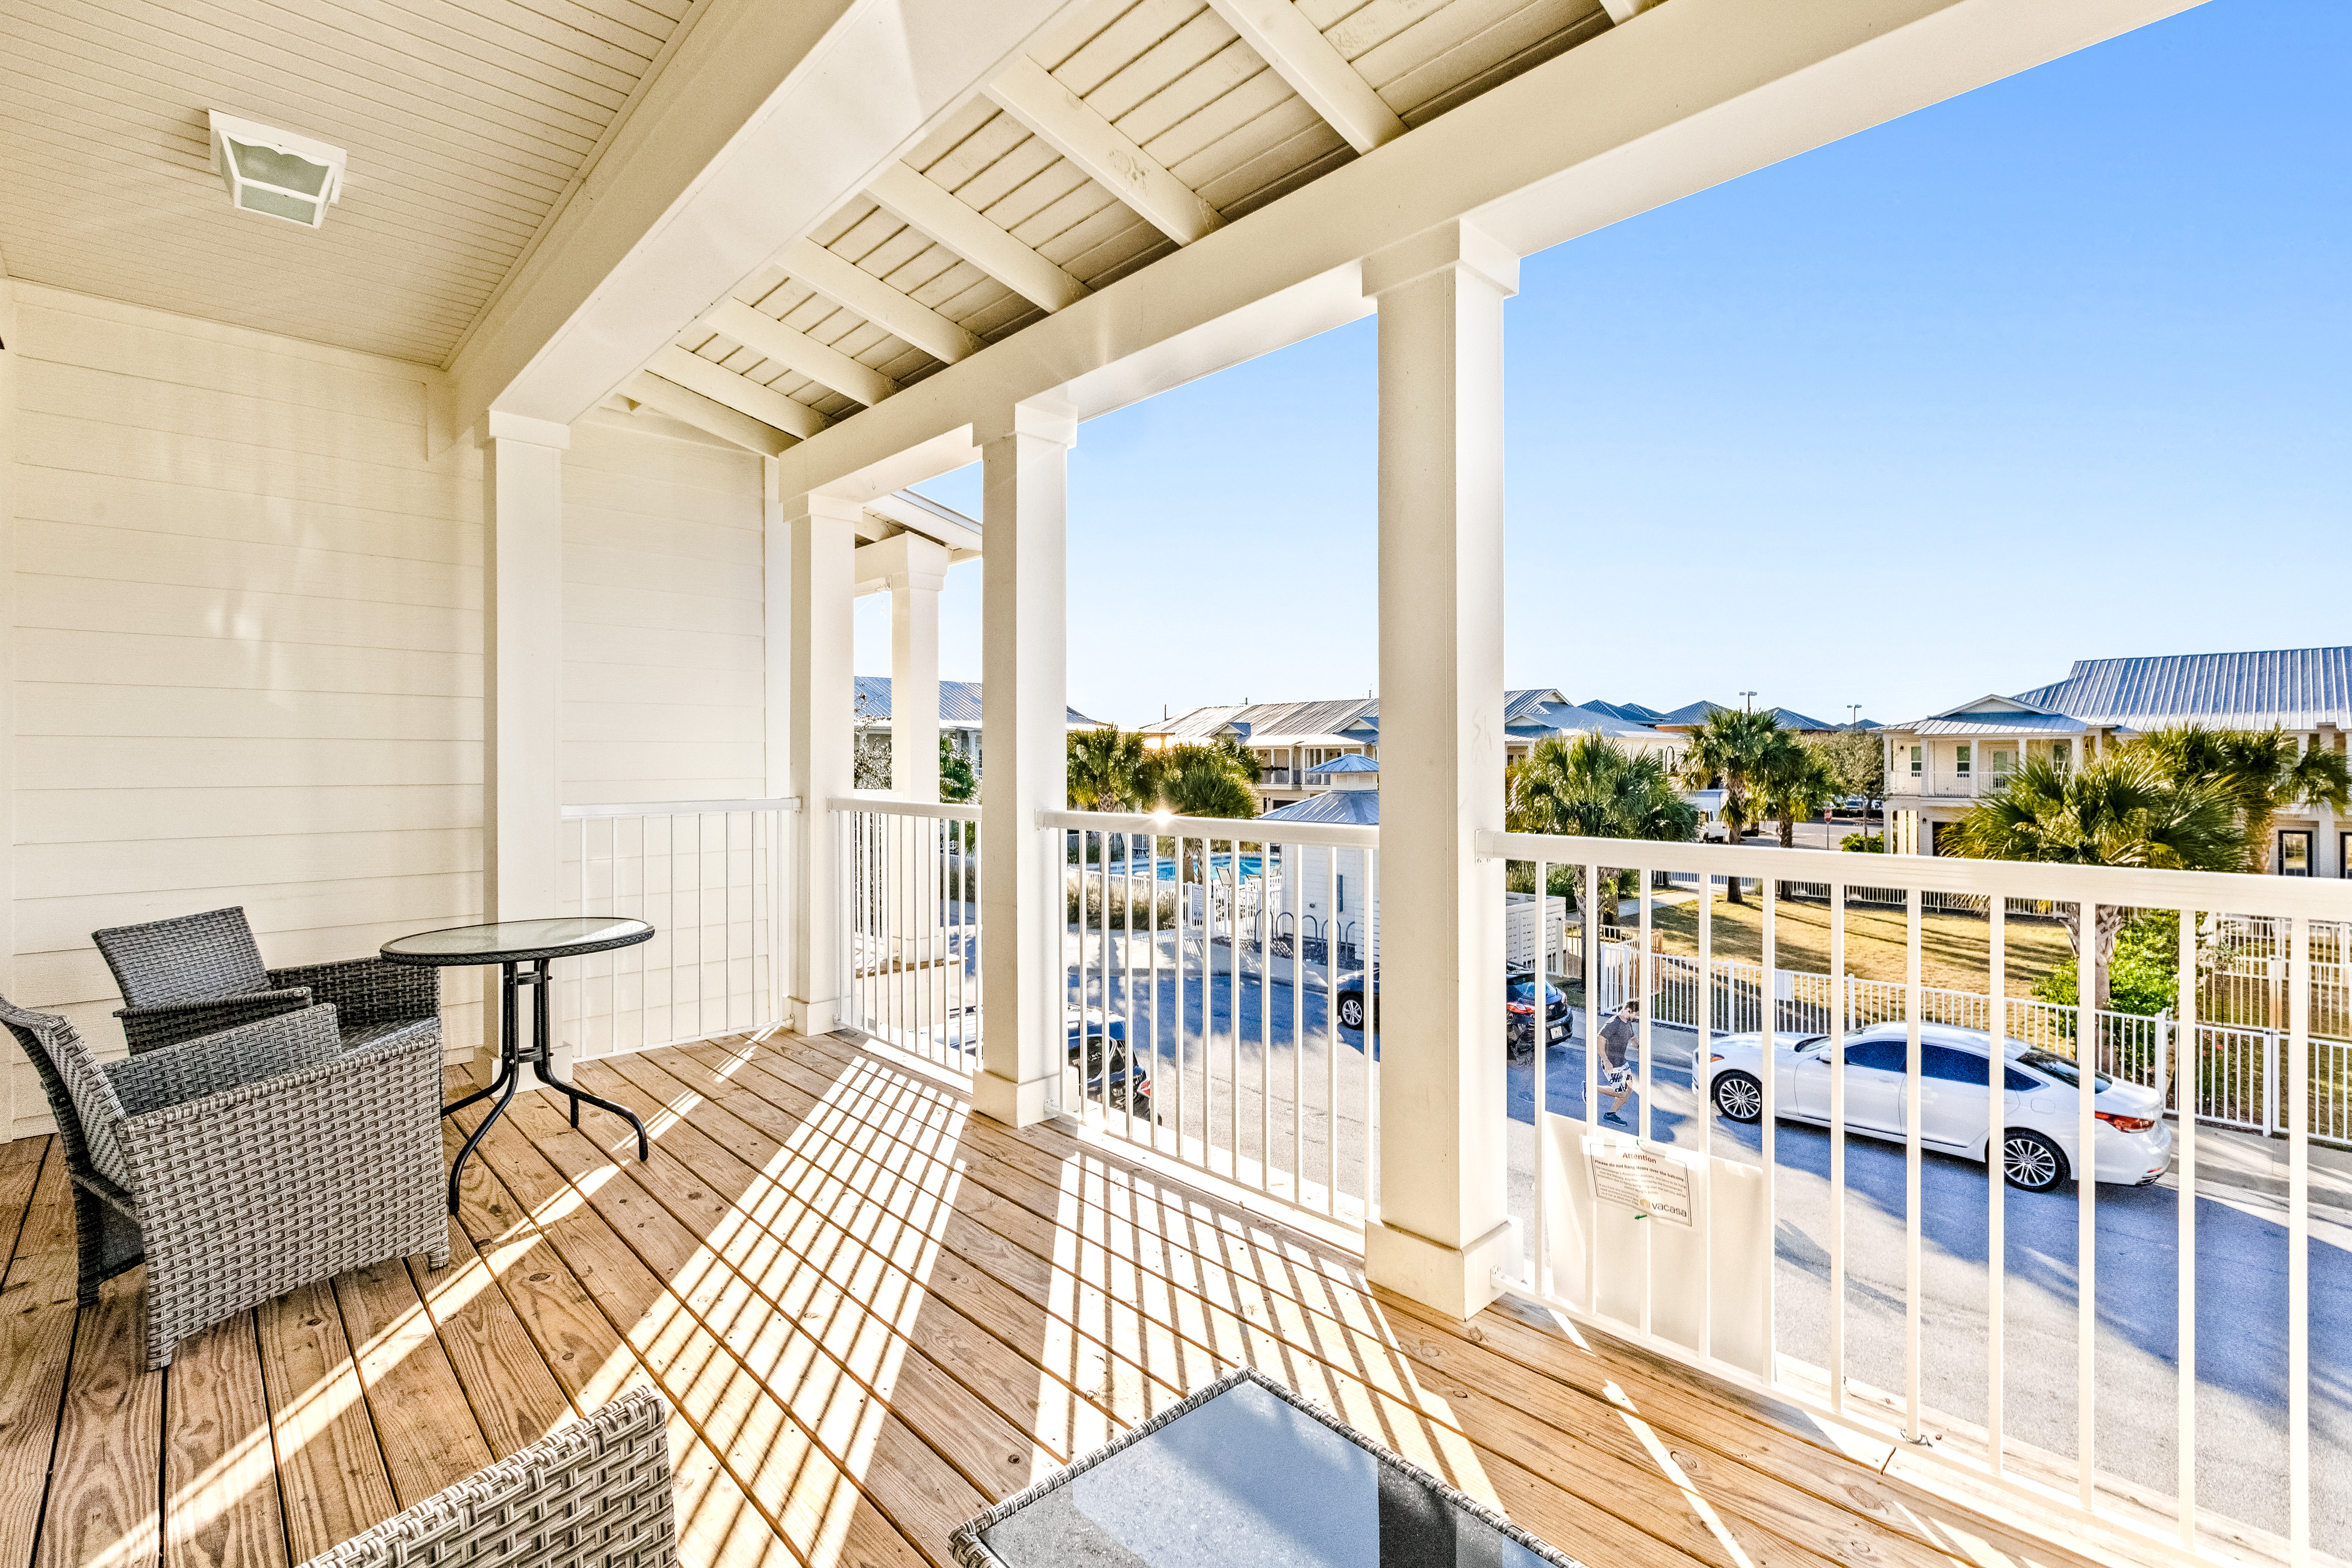 Crystal Beach Dr Townhomes #C116 House / Cottage rental in Destin Beach House Rentals in Destin Florida - #1